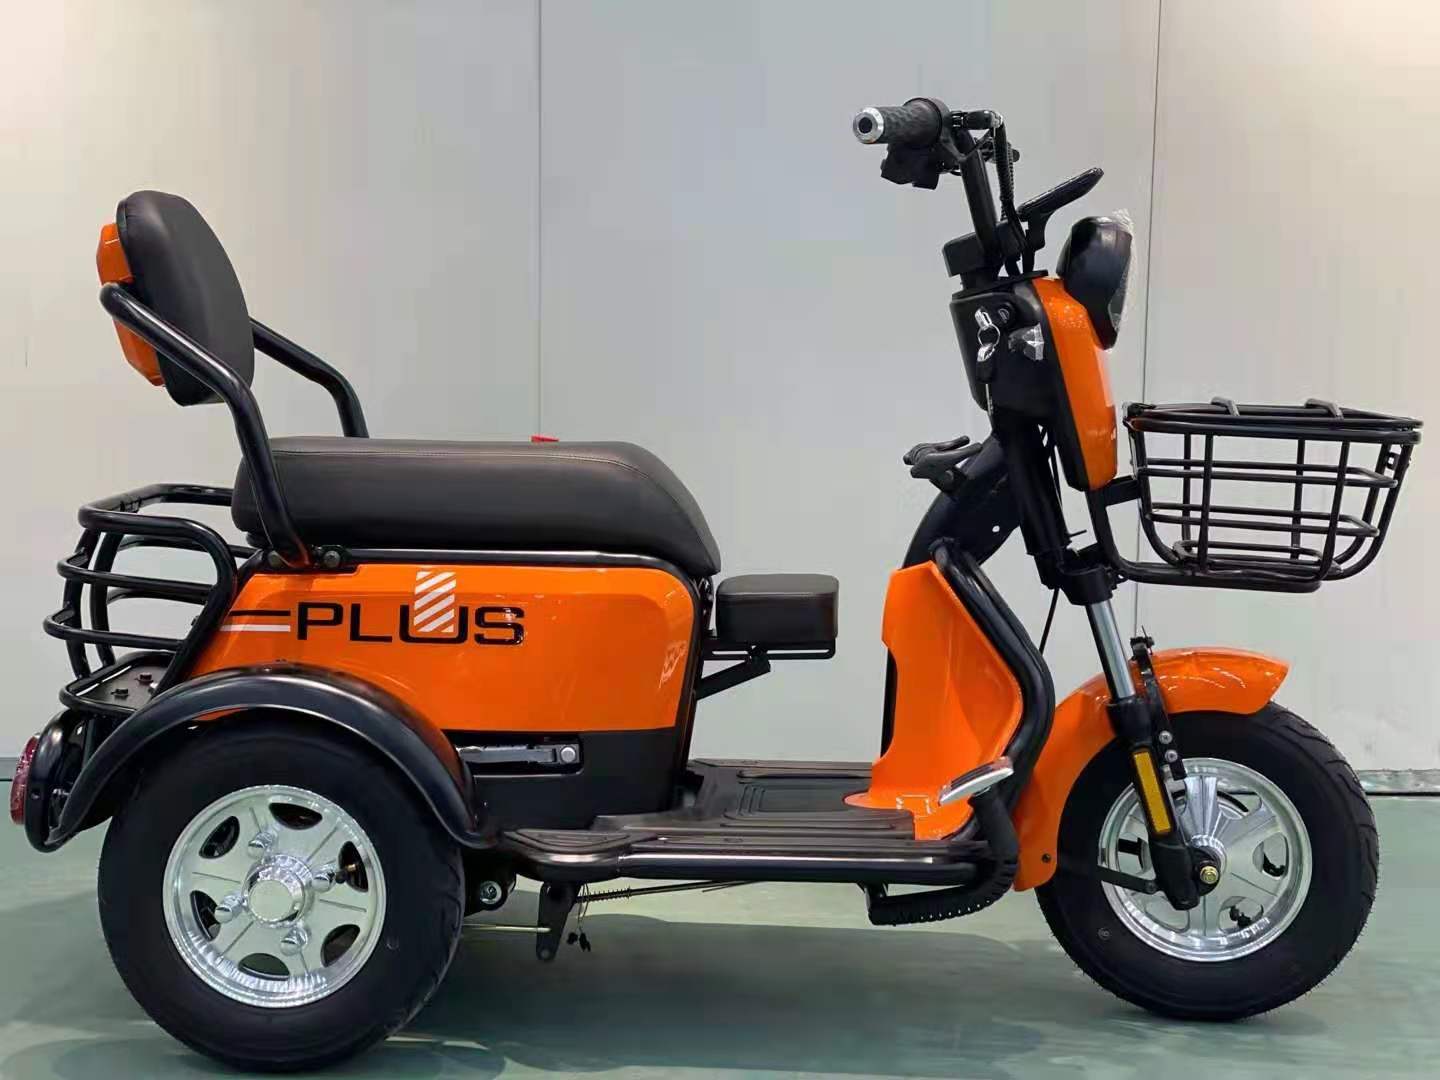 Best price adult trike/electric tricycle for sale